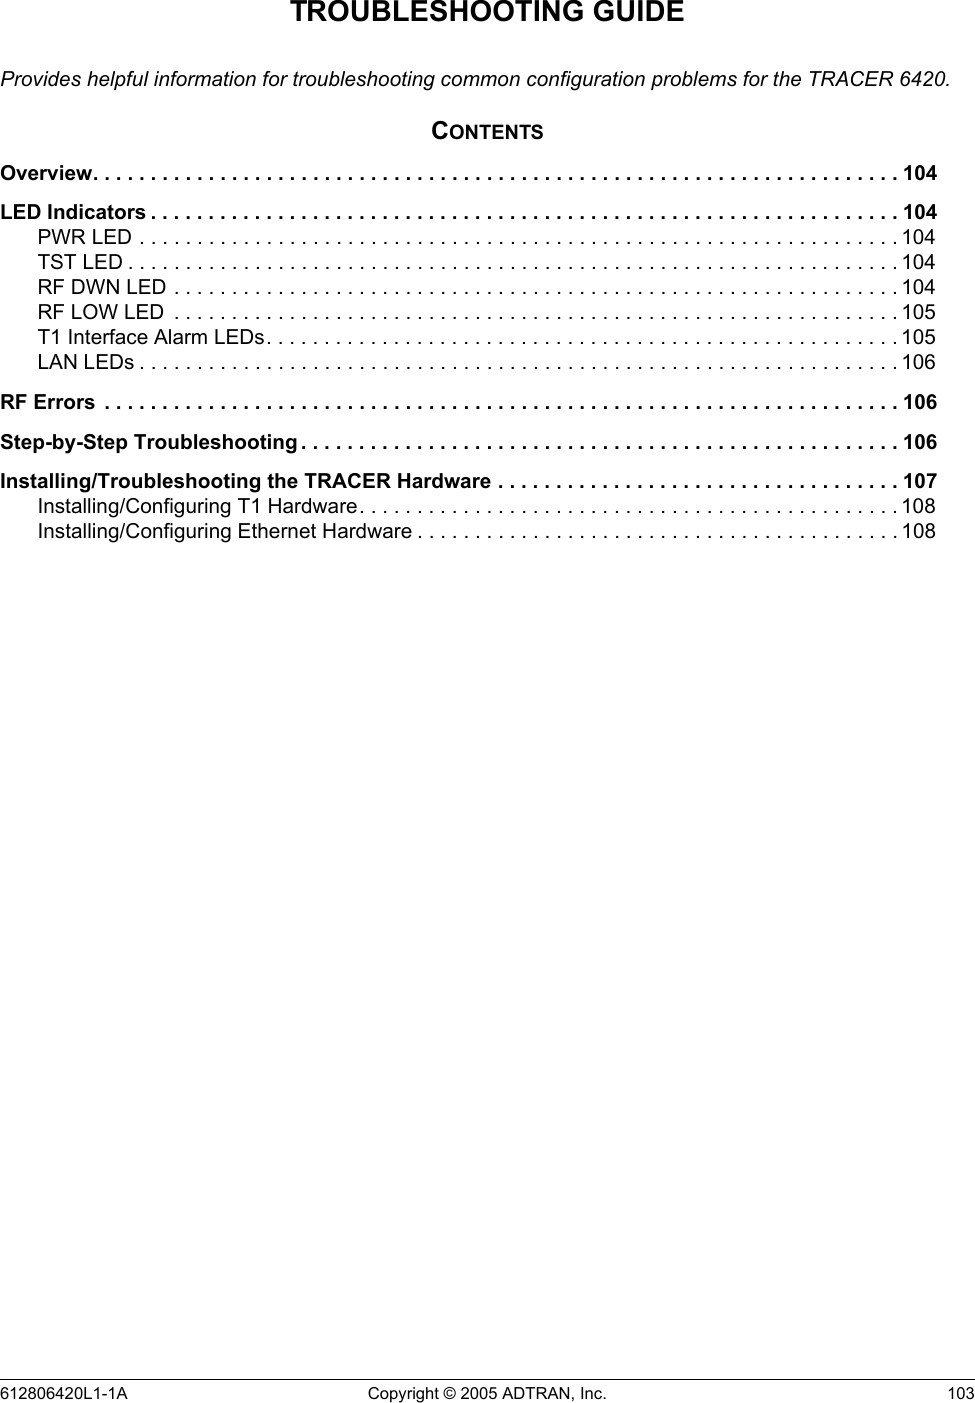 612806420L1-1A Copyright © 2005 ADTRAN, Inc.  103TROUBLESHOOTING GUIDEProvides helpful information for troubleshooting common configuration problems for the TRACER 6420.CONTENTSOverview. . . . . . . . . . . . . . . . . . . . . . . . . . . . . . . . . . . . . . . . . . . . . . . . . . . . . . . . . . . . . . . . . . . . . . 104LED Indicators . . . . . . . . . . . . . . . . . . . . . . . . . . . . . . . . . . . . . . . . . . . . . . . . . . . . . . . . . . . . . . . . . 104PWR LED . . . . . . . . . . . . . . . . . . . . . . . . . . . . . . . . . . . . . . . . . . . . . . . . . . . . . . . . . . . . . . . . . . 104TST LED . . . . . . . . . . . . . . . . . . . . . . . . . . . . . . . . . . . . . . . . . . . . . . . . . . . . . . . . . . . . . . . . . . . 104RF DWN LED . . . . . . . . . . . . . . . . . . . . . . . . . . . . . . . . . . . . . . . . . . . . . . . . . . . . . . . . . . . . . . . 104RF LOW LED  . . . . . . . . . . . . . . . . . . . . . . . . . . . . . . . . . . . . . . . . . . . . . . . . . . . . . . . . . . . . . . . 105T1 Interface Alarm LEDs. . . . . . . . . . . . . . . . . . . . . . . . . . . . . . . . . . . . . . . . . . . . . . . . . . . . . . . 105LAN LEDs . . . . . . . . . . . . . . . . . . . . . . . . . . . . . . . . . . . . . . . . . . . . . . . . . . . . . . . . . . . . . . . . . . 106RF Errors  . . . . . . . . . . . . . . . . . . . . . . . . . . . . . . . . . . . . . . . . . . . . . . . . . . . . . . . . . . . . . . . . . . . . . 106Step-by-Step Troubleshooting . . . . . . . . . . . . . . . . . . . . . . . . . . . . . . . . . . . . . . . . . . . . . . . . . . . . 106Installing/Troubleshooting the TRACER Hardware . . . . . . . . . . . . . . . . . . . . . . . . . . . . . . . . . . . 107Installing/Configuring T1 Hardware. . . . . . . . . . . . . . . . . . . . . . . . . . . . . . . . . . . . . . . . . . . . . . . 108Installing/Configuring Ethernet Hardware . . . . . . . . . . . . . . . . . . . . . . . . . . . . . . . . . . . . . . . . . . 108